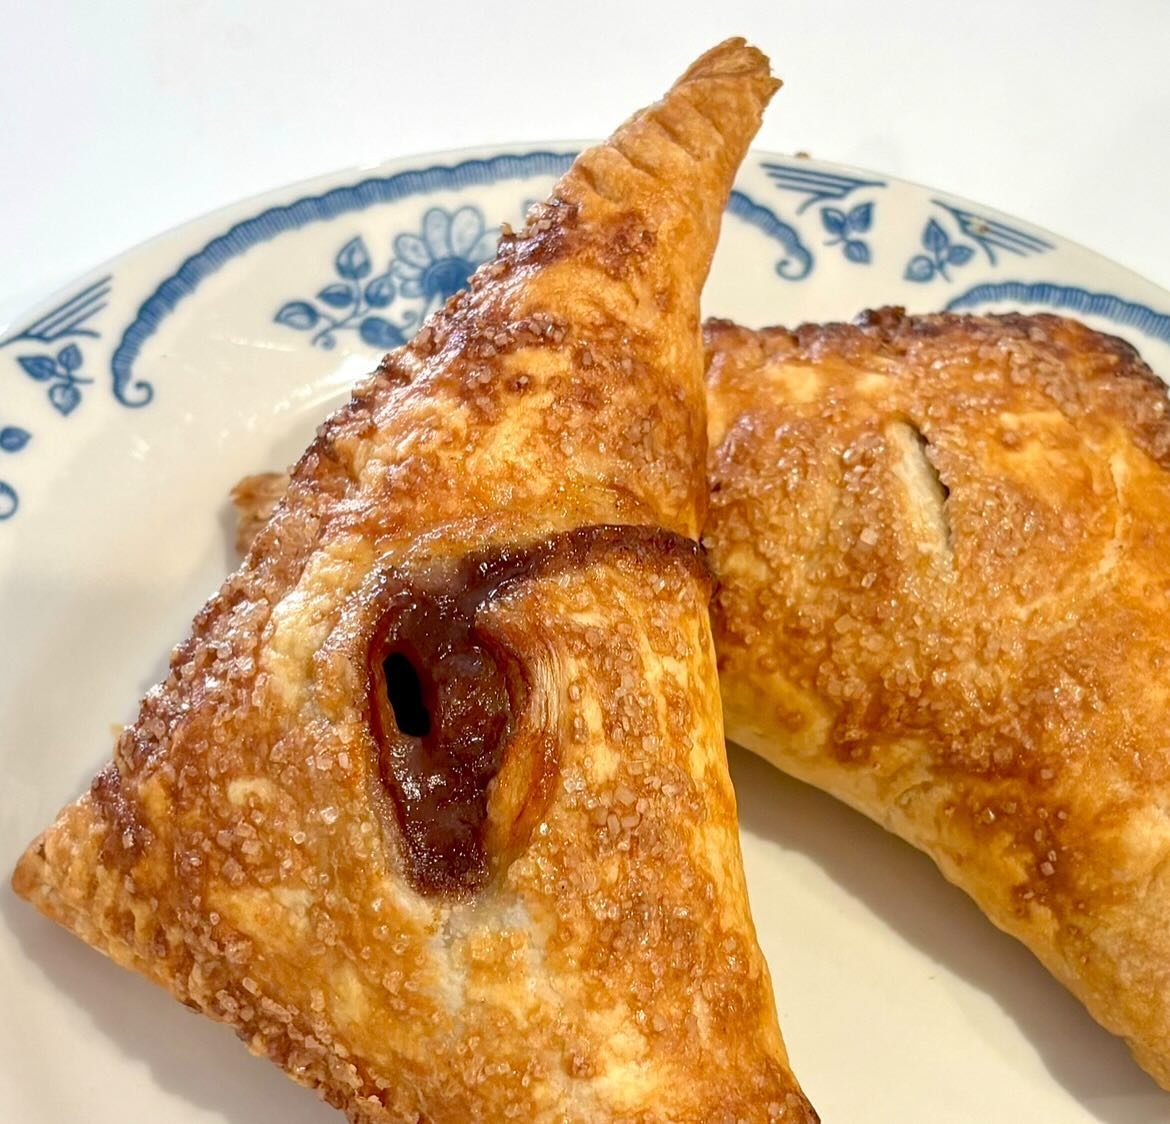 Apple Turnovers available all weekend 🍏 🍎 

#appleturnovers #shadysideeats #pittsburghfoodie #pghbakery #pittsburghcoffee #supportlocal #shadysidecafe #pittsburghbrunch #pghcafe #localflavors #pghfoodscene #h2p #cmu  #chatamuniversity #lattepgh #pi